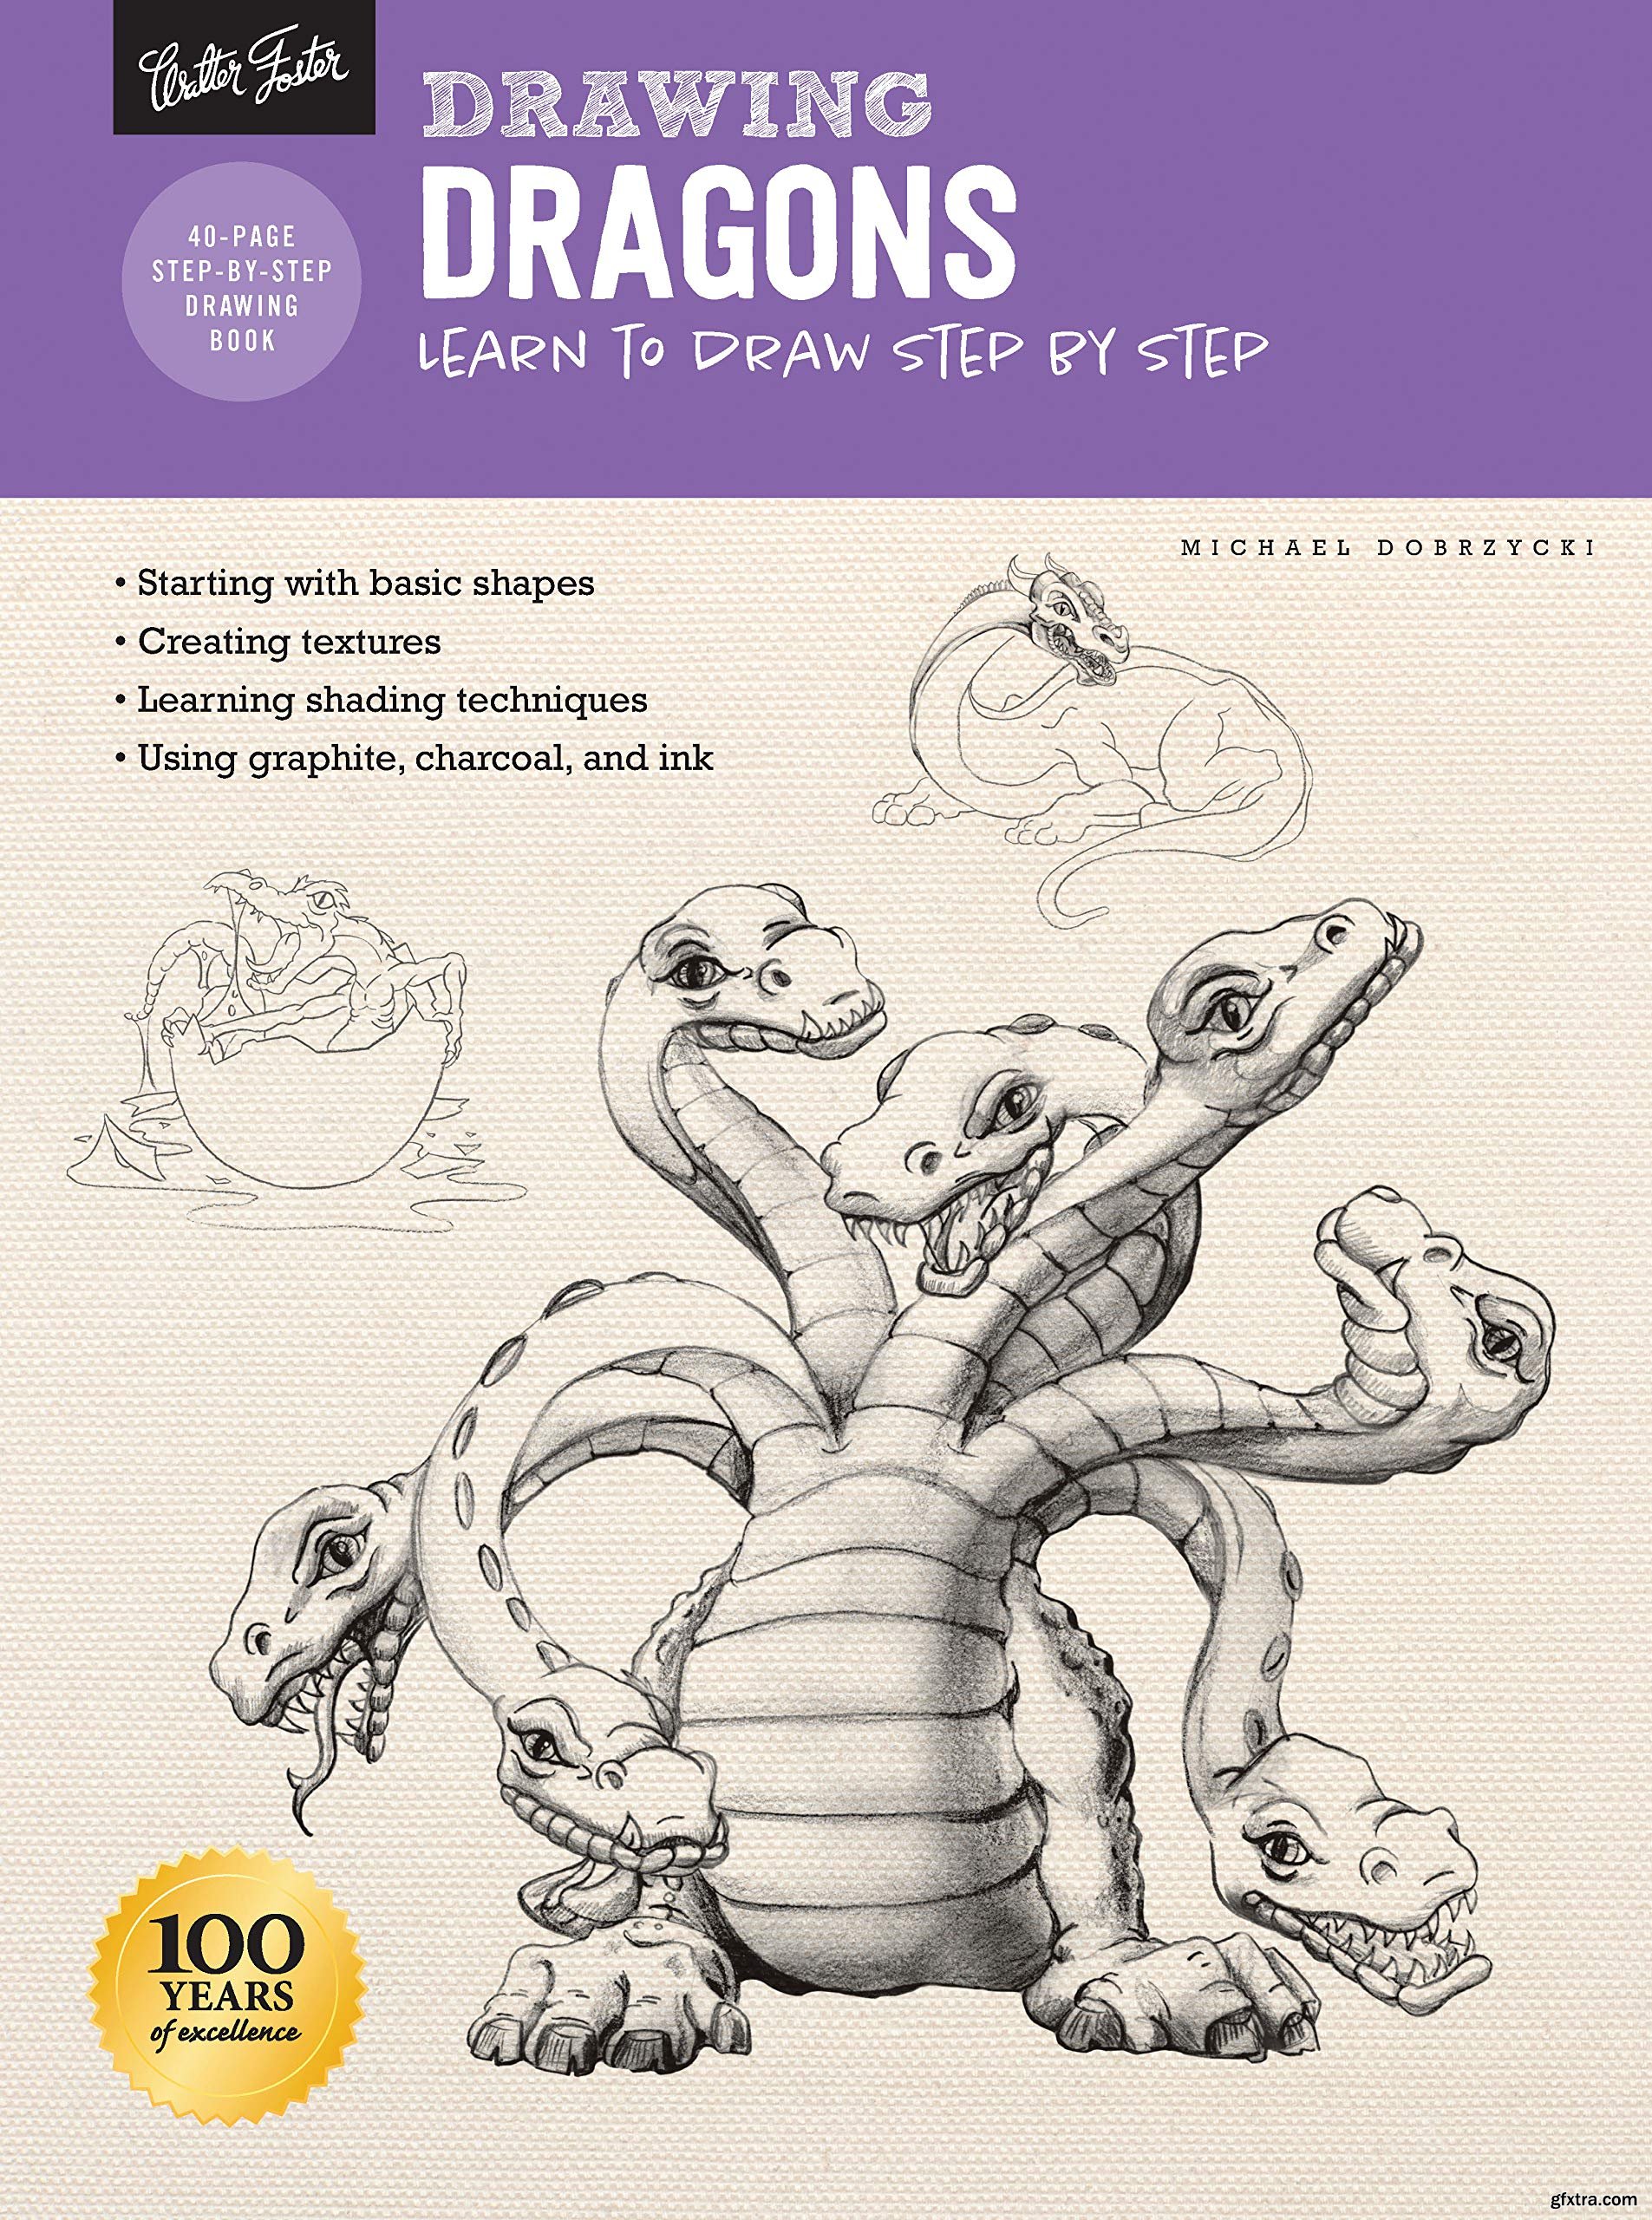 Top How To Draw Manga Dragons in the world The ultimate guide 